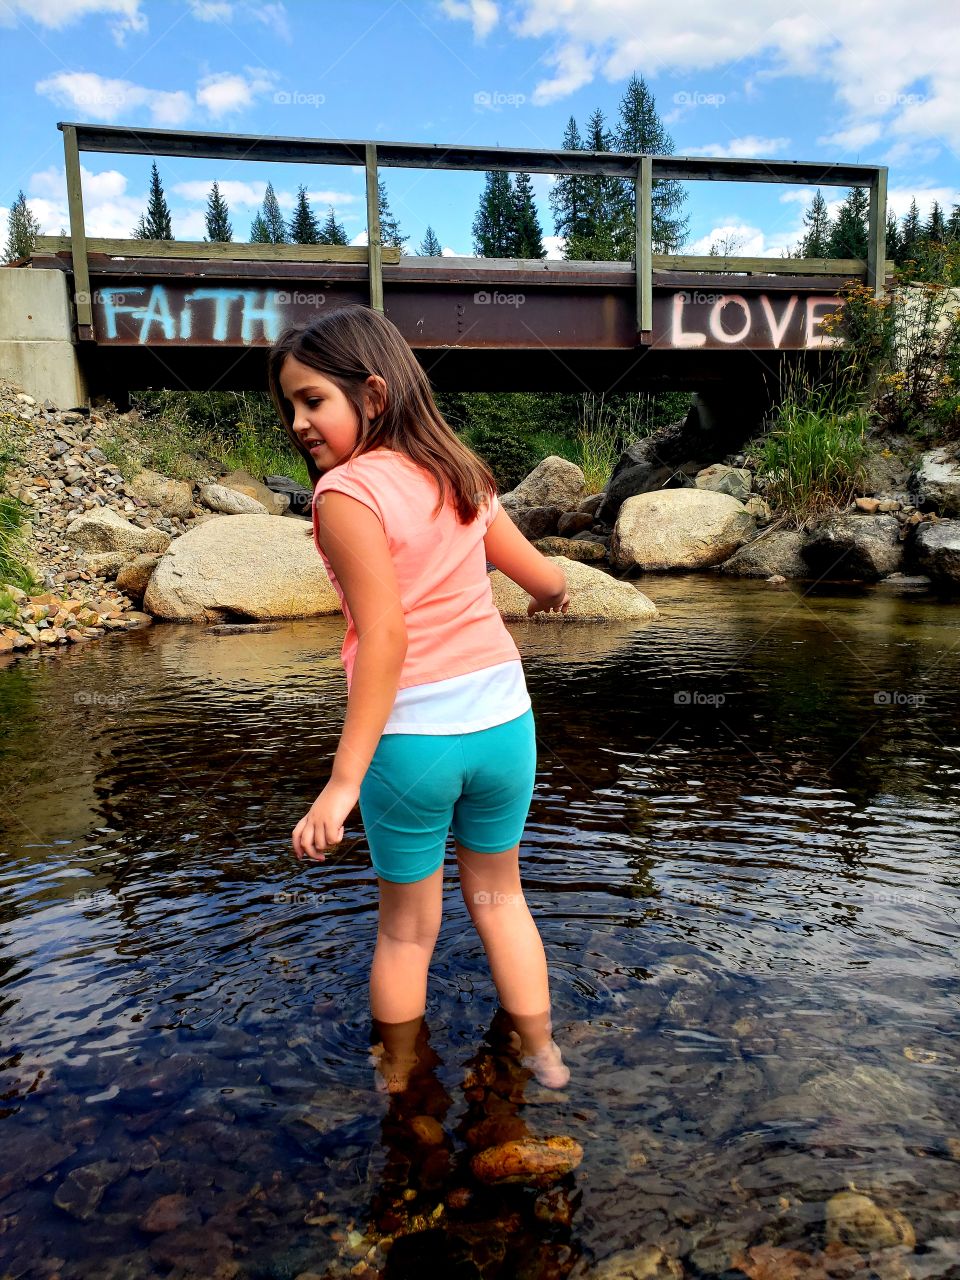 faith and love, playing in the creek